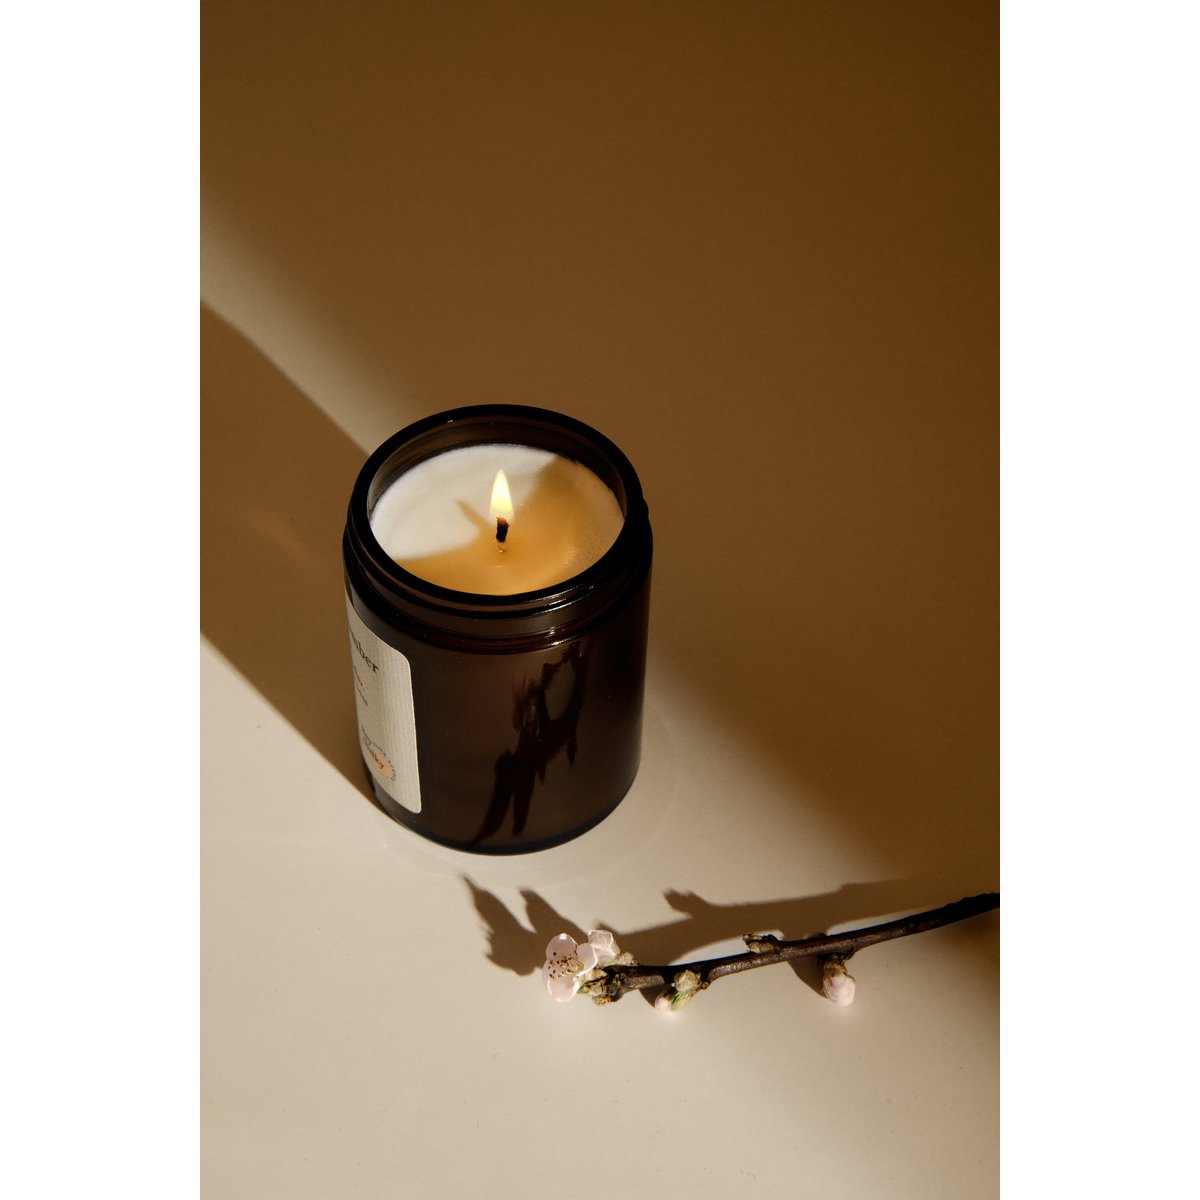 Candle "The Library" 155 g - scented candle in a glass